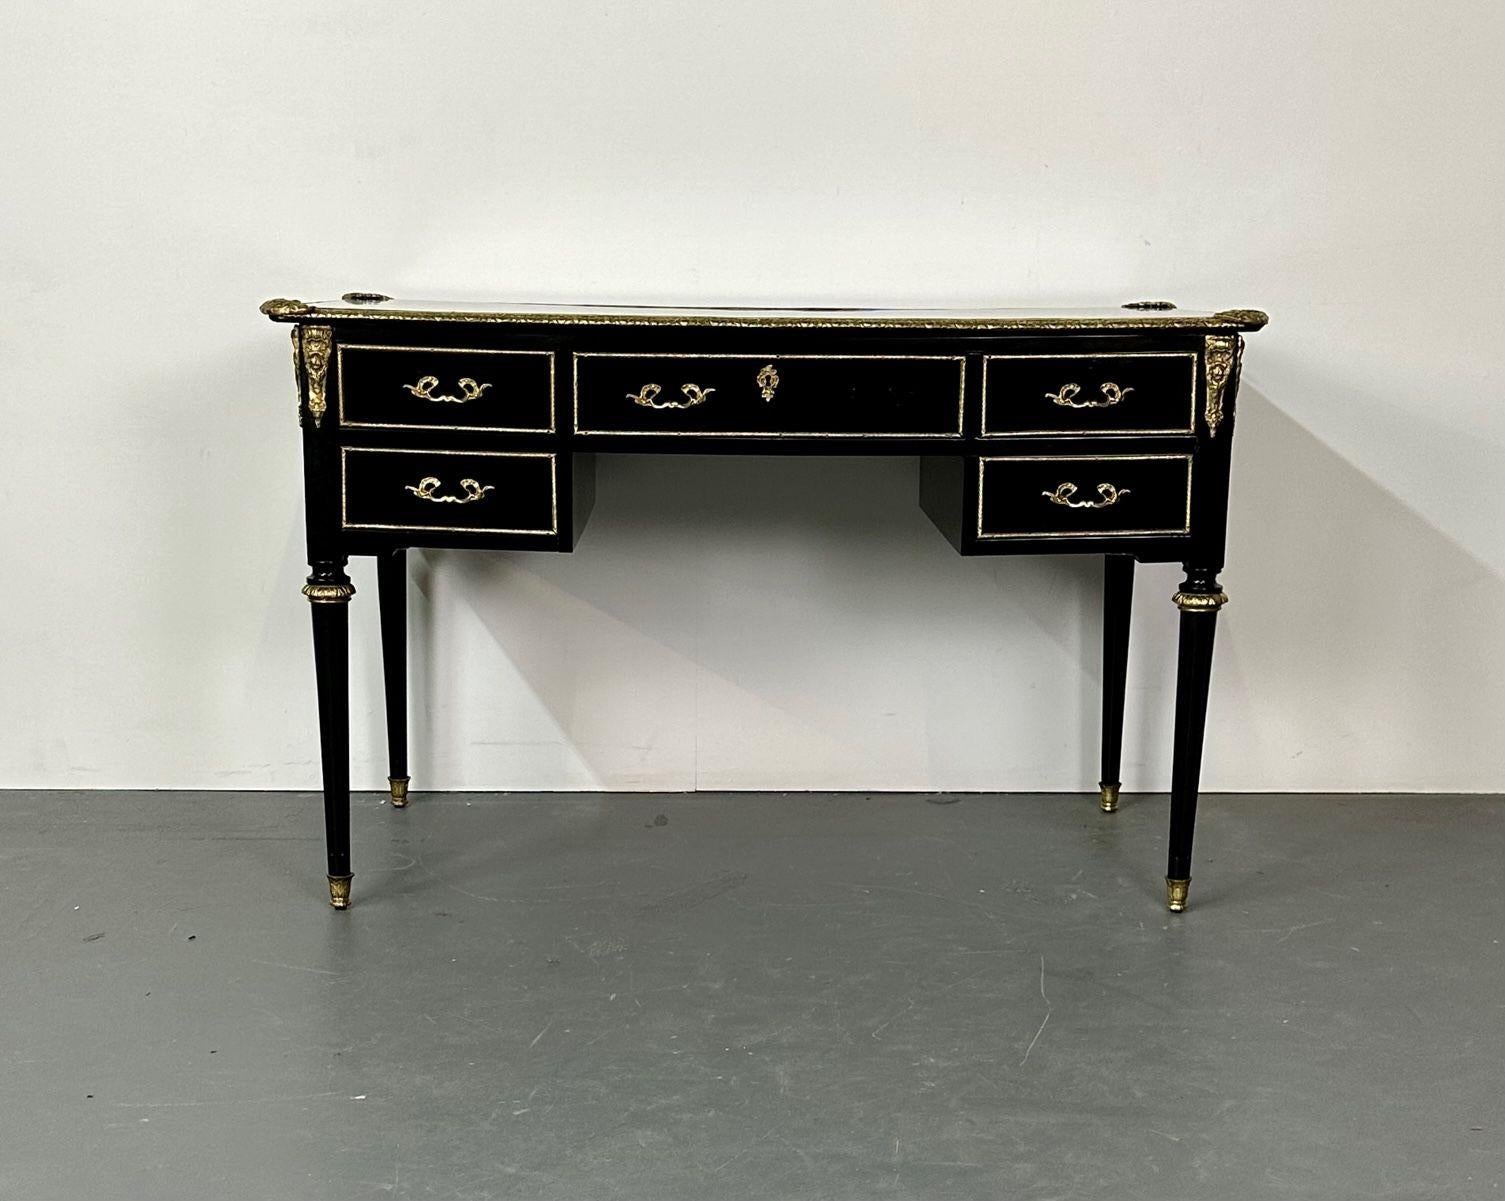 A Hollywood Regency Ebony and Bronze Mounted Desk, Writing Table or Vanity. One of a pair. 
A stunning example of this highly sought after designers work. Bronze sabots and capitals shine on the sleek tapering legs with flame bronze mounts on the